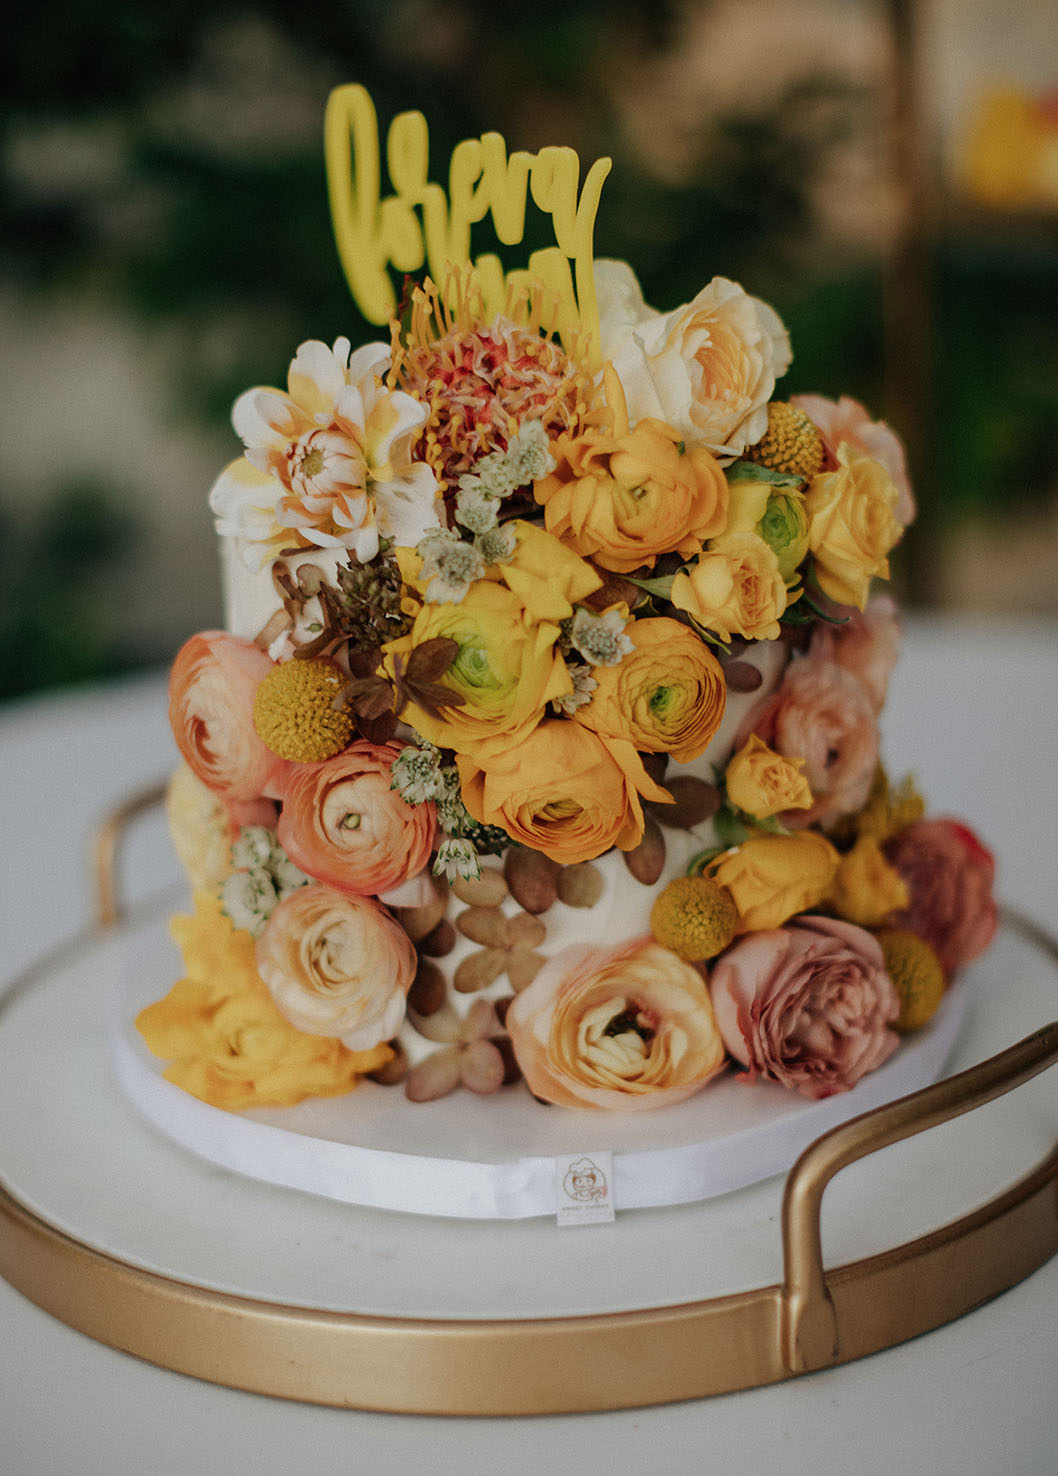 The wedding cake was very whimsy, it was all covered with yellow and rust blooms plus a calligraphy topper